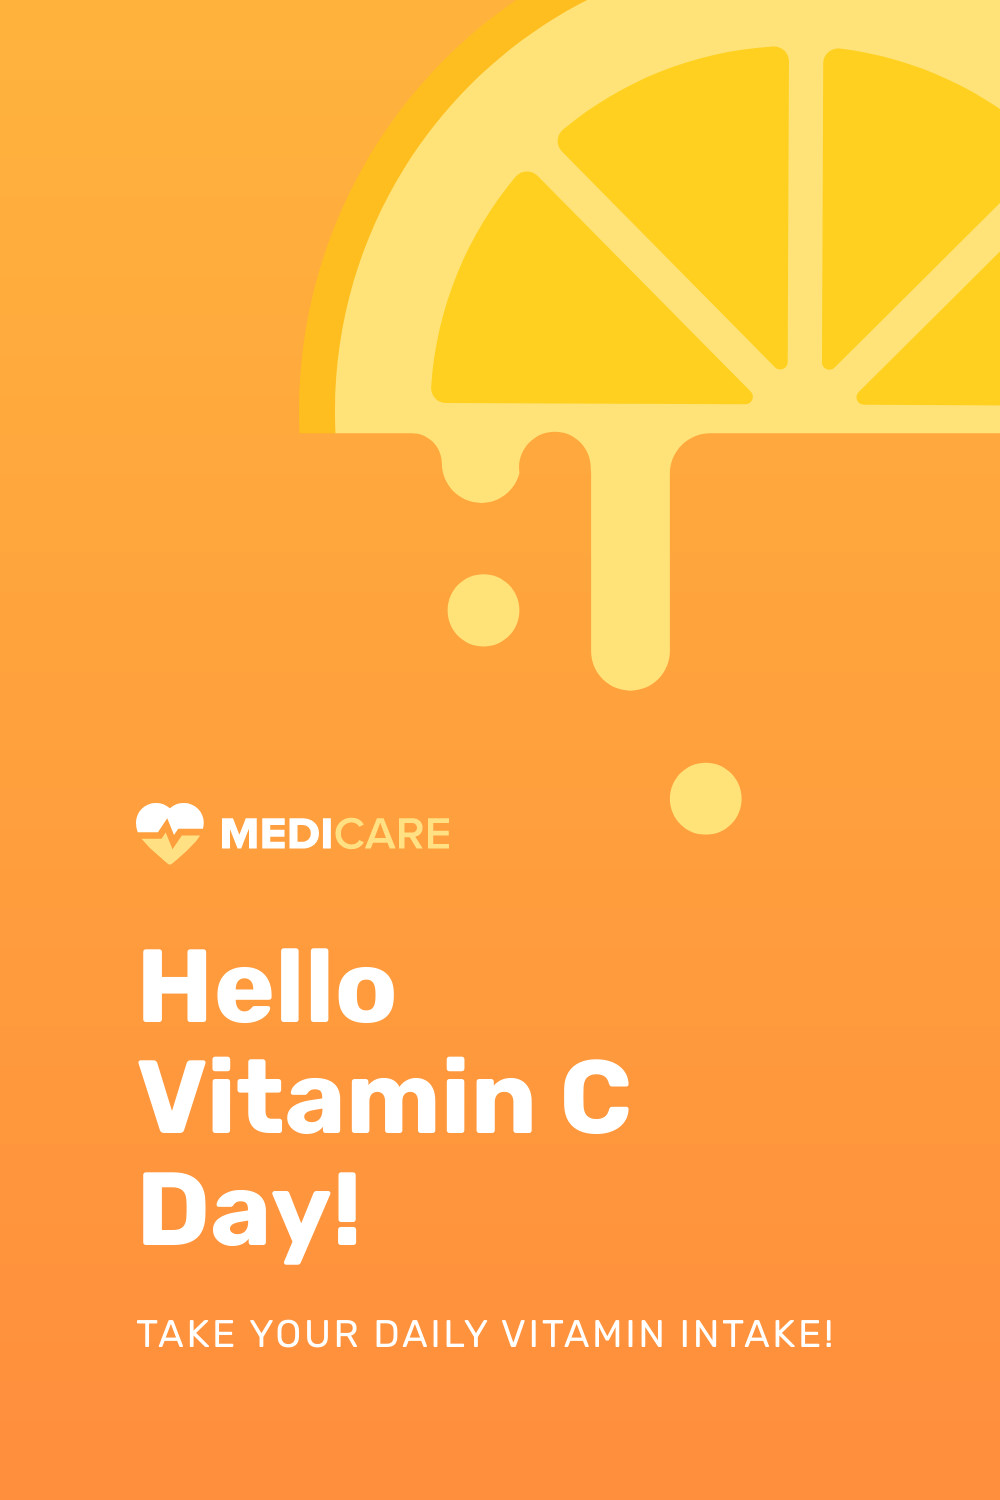 Daily Intake on Vitamin C Day 